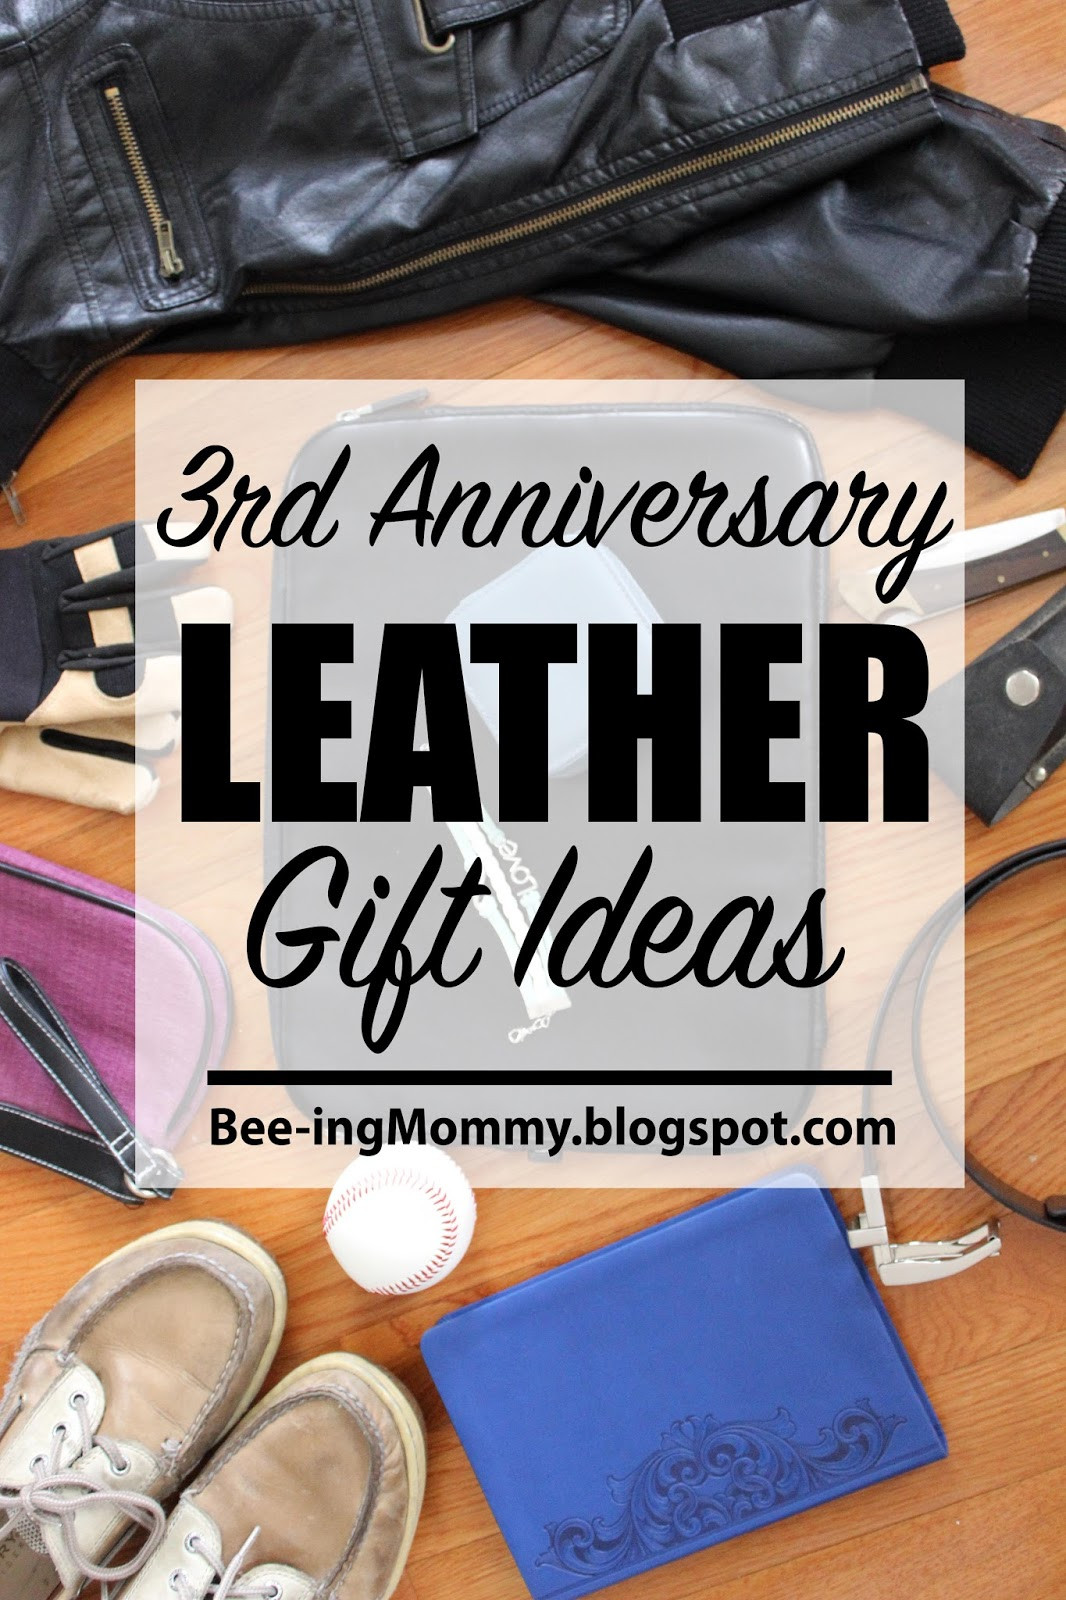 Third Anniversary Gift Ideas For Her
 Bee ing Mommy Blog Third Wedding Anniversary Gift Ideas